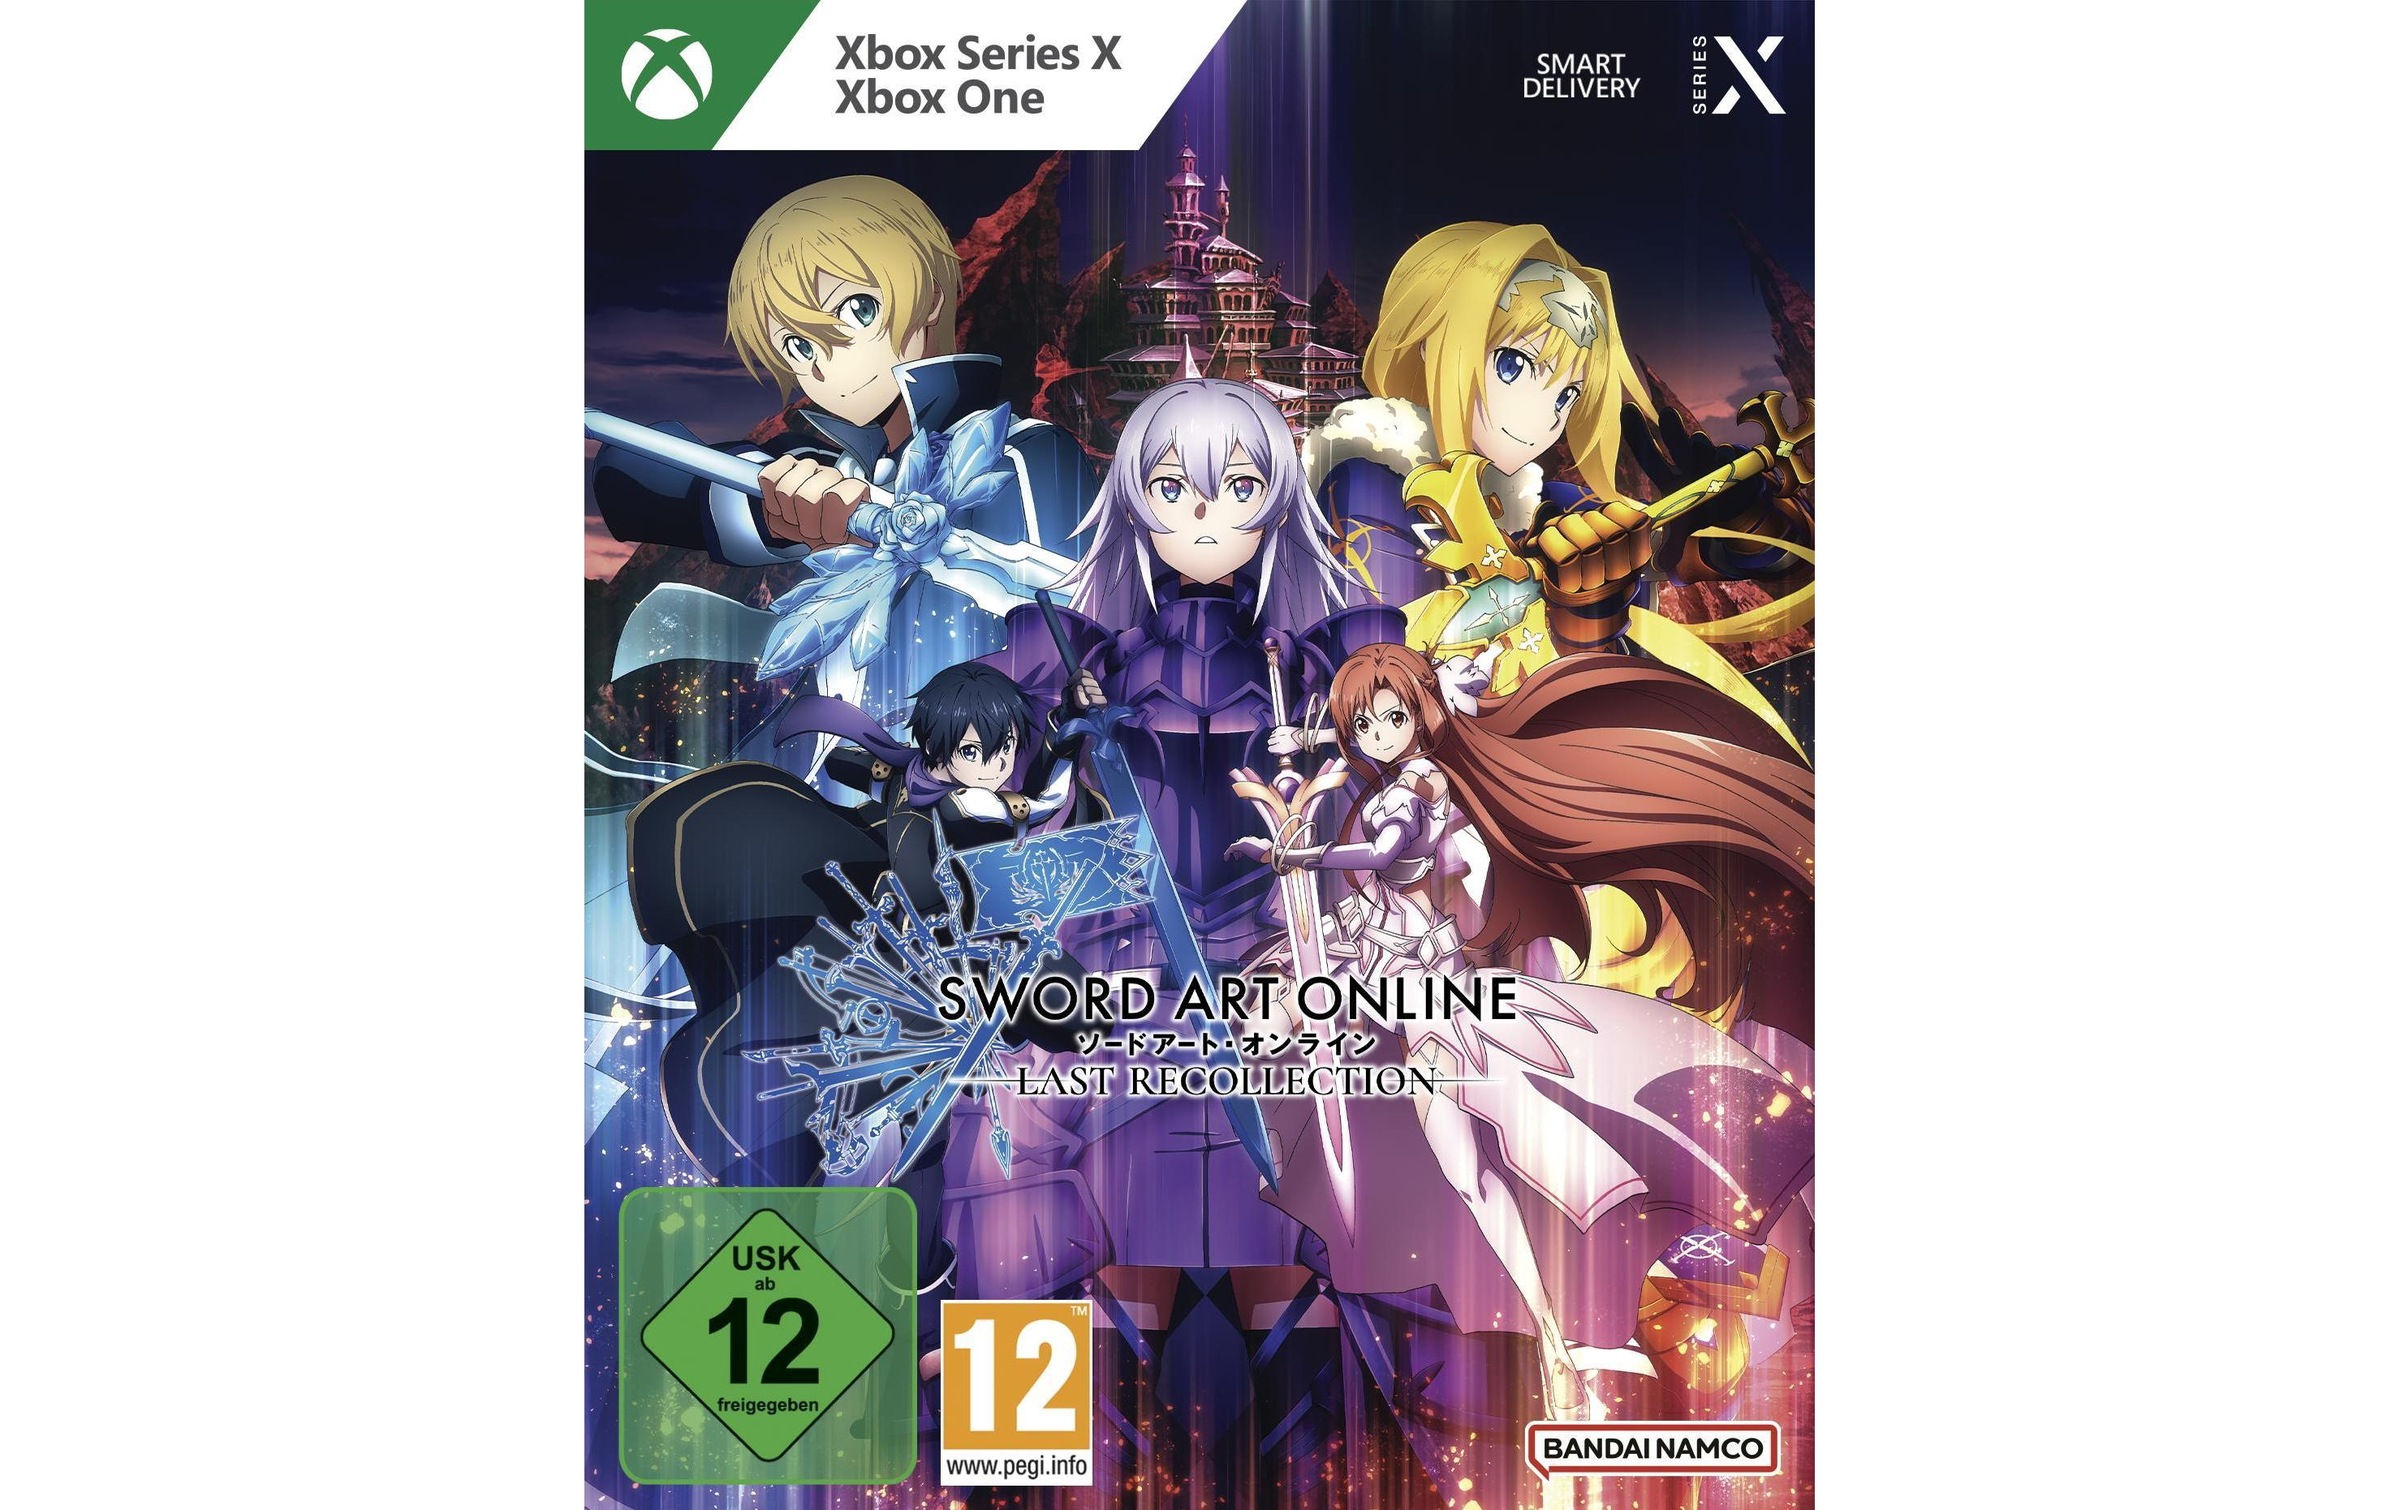 BANDAI NAMCO Spielesoftware »Namco Sword Art Online: Last Recollection«, Xbox One-Xbox Series X